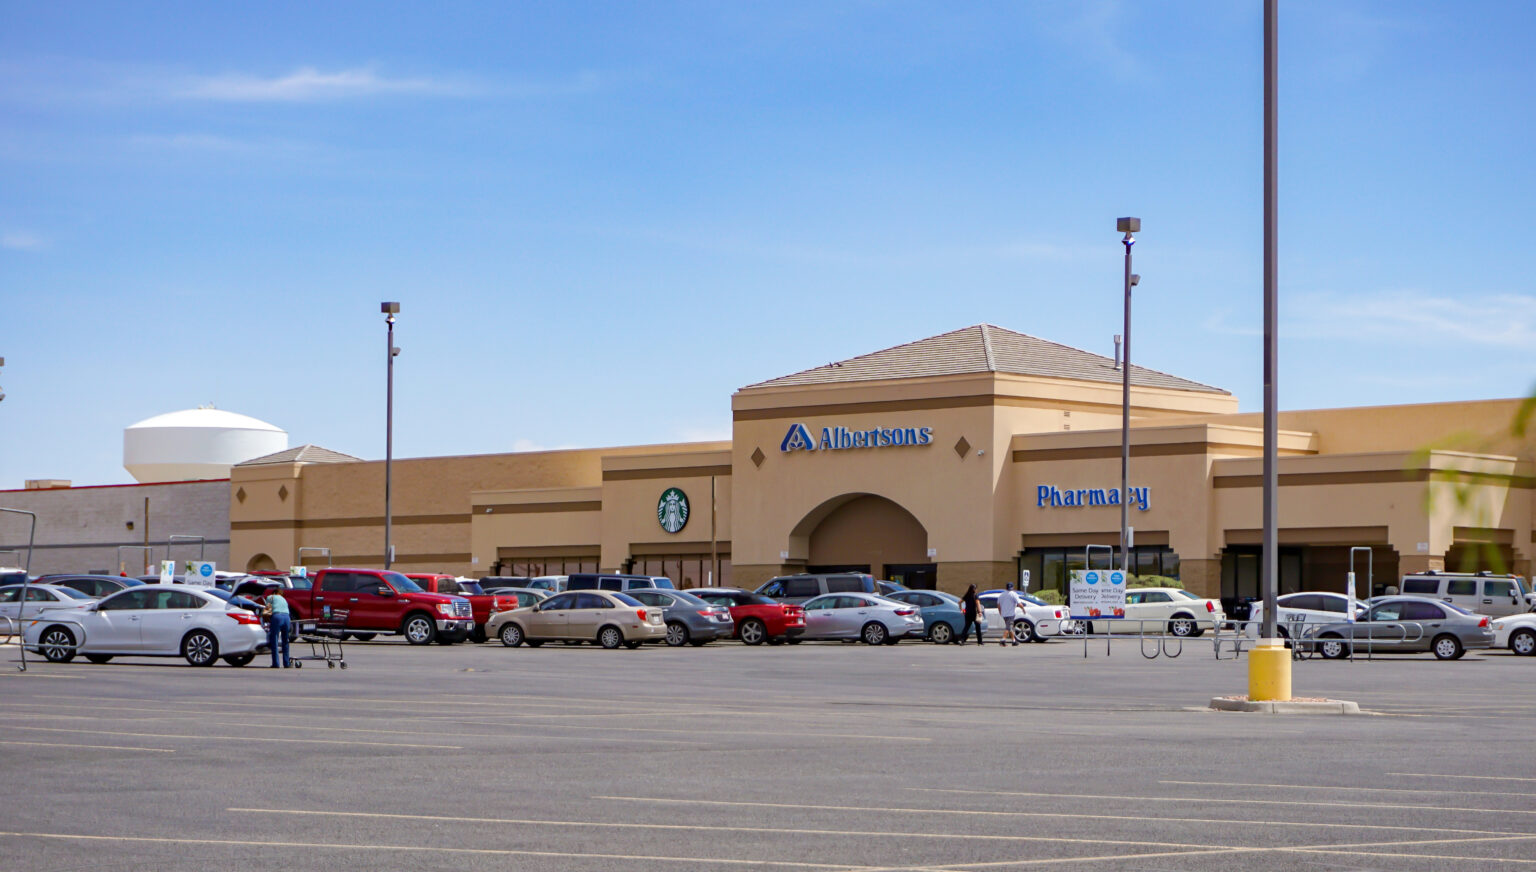 Exterior of an Albertsons store and parking lot